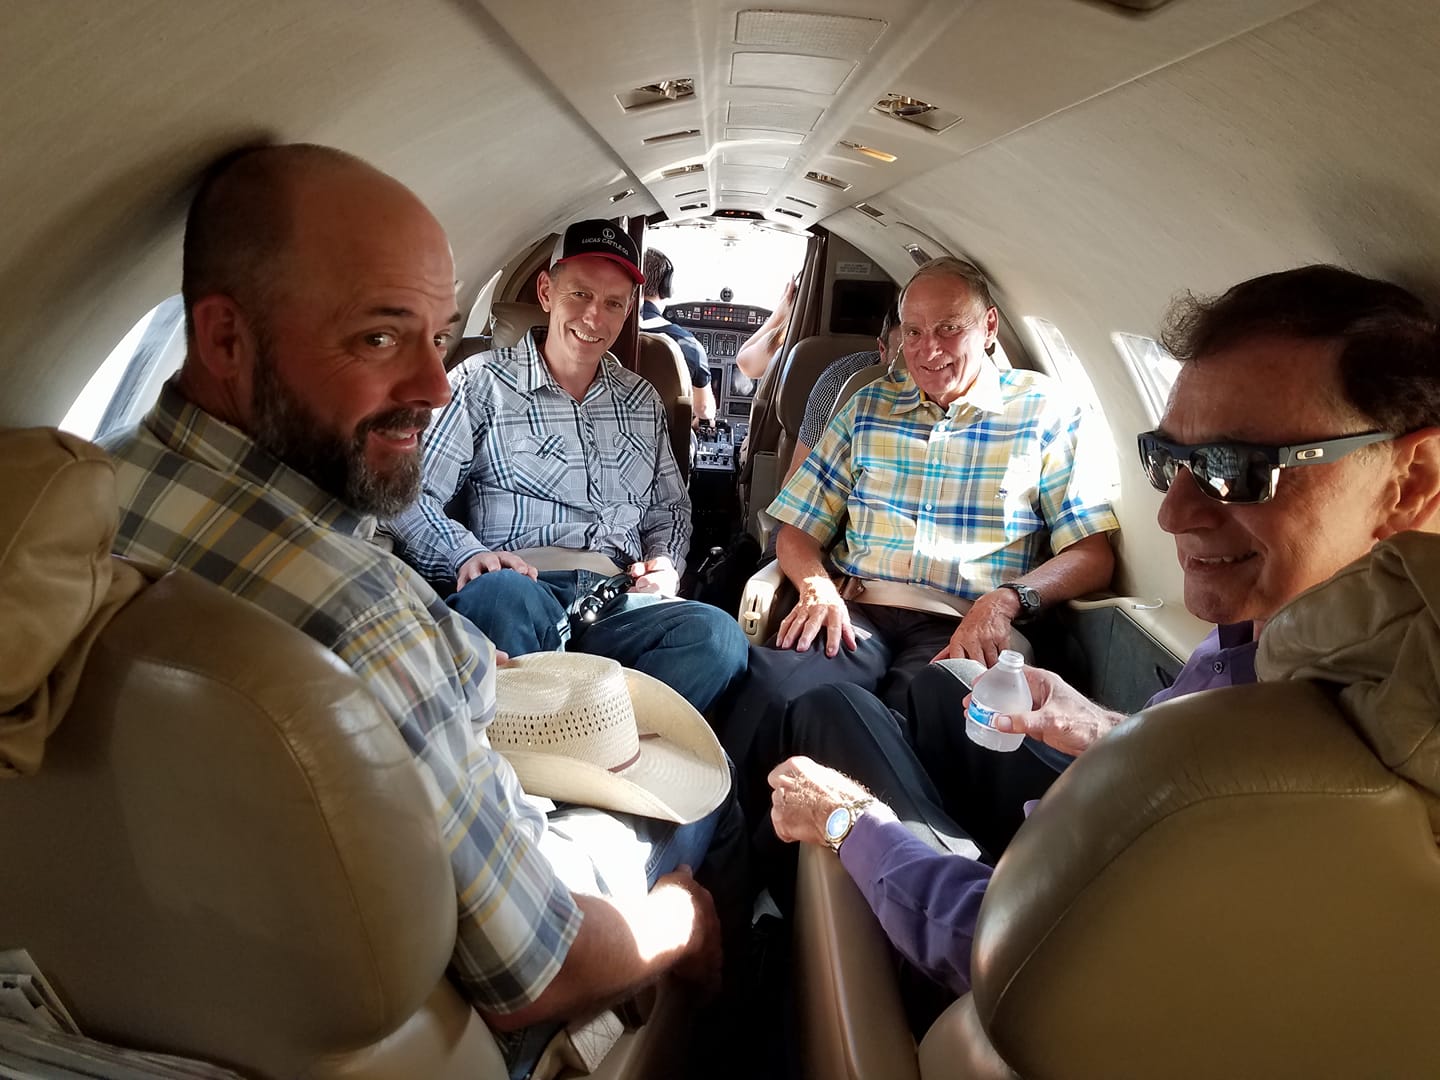 From his nonprofit's Facebook page (Protect the Harvest). Oil man Lucas gives pardoned arsonists Steven and Dwight Hammond a ride home to Burns, Ore. … in his company's private jet.